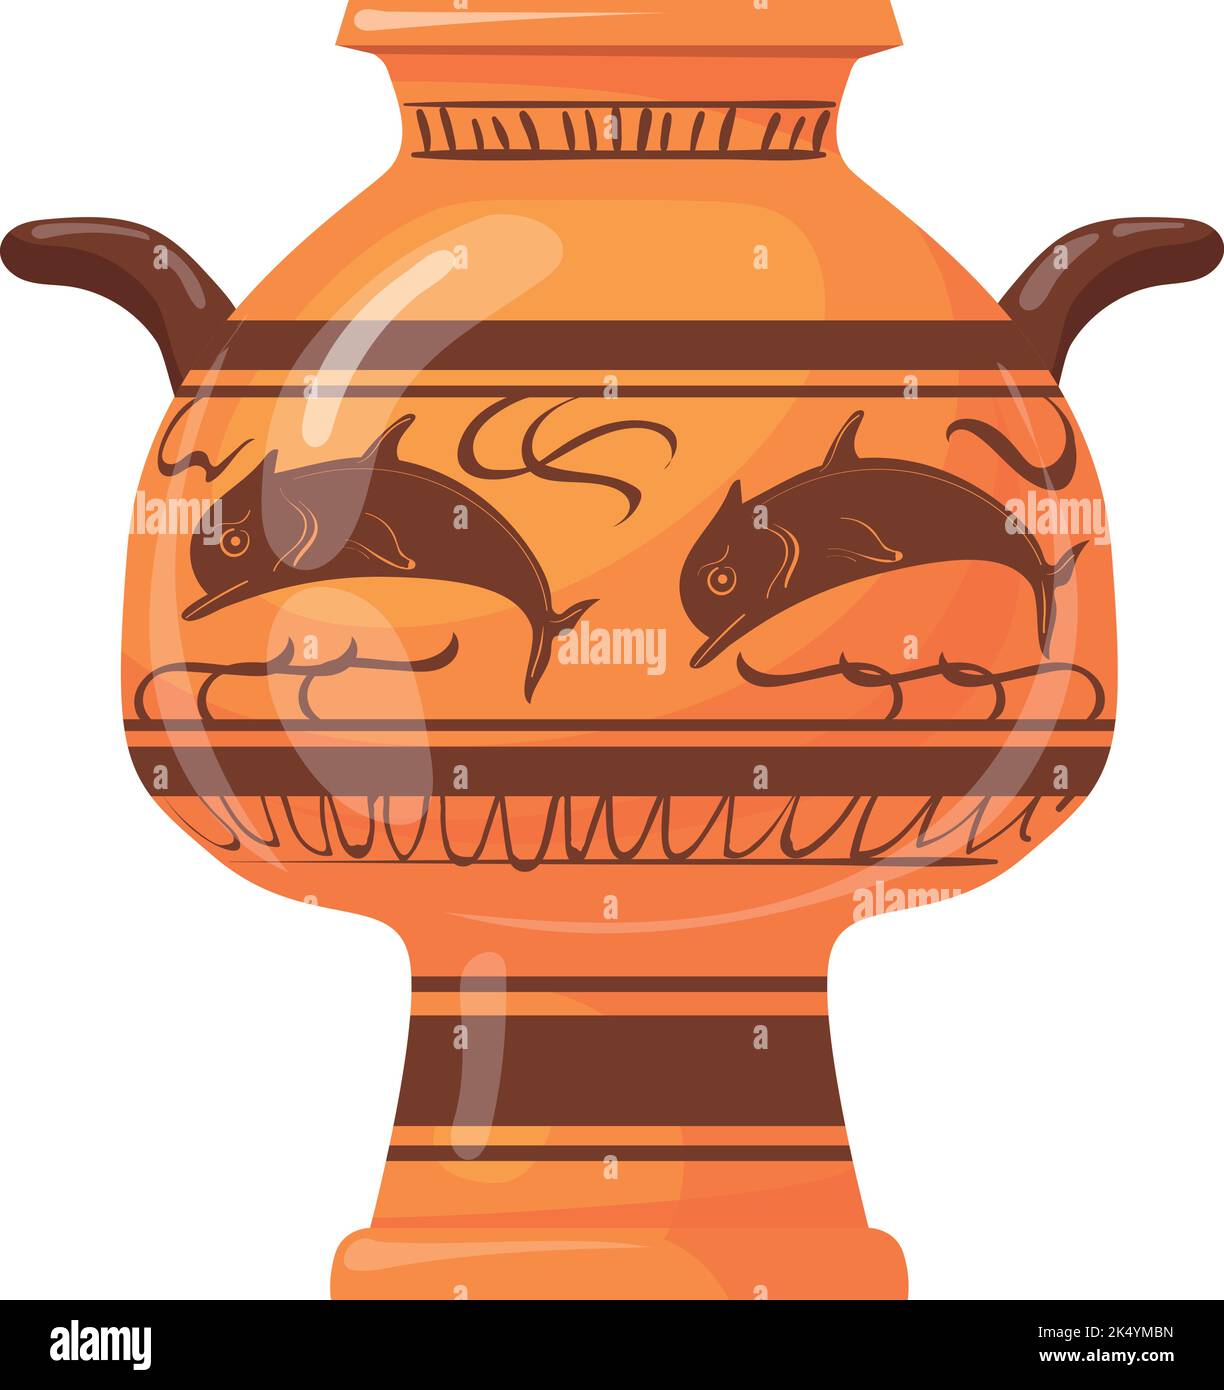 Ancient greek clay vase. Roman empire pottery isolated on white background Stock Vector